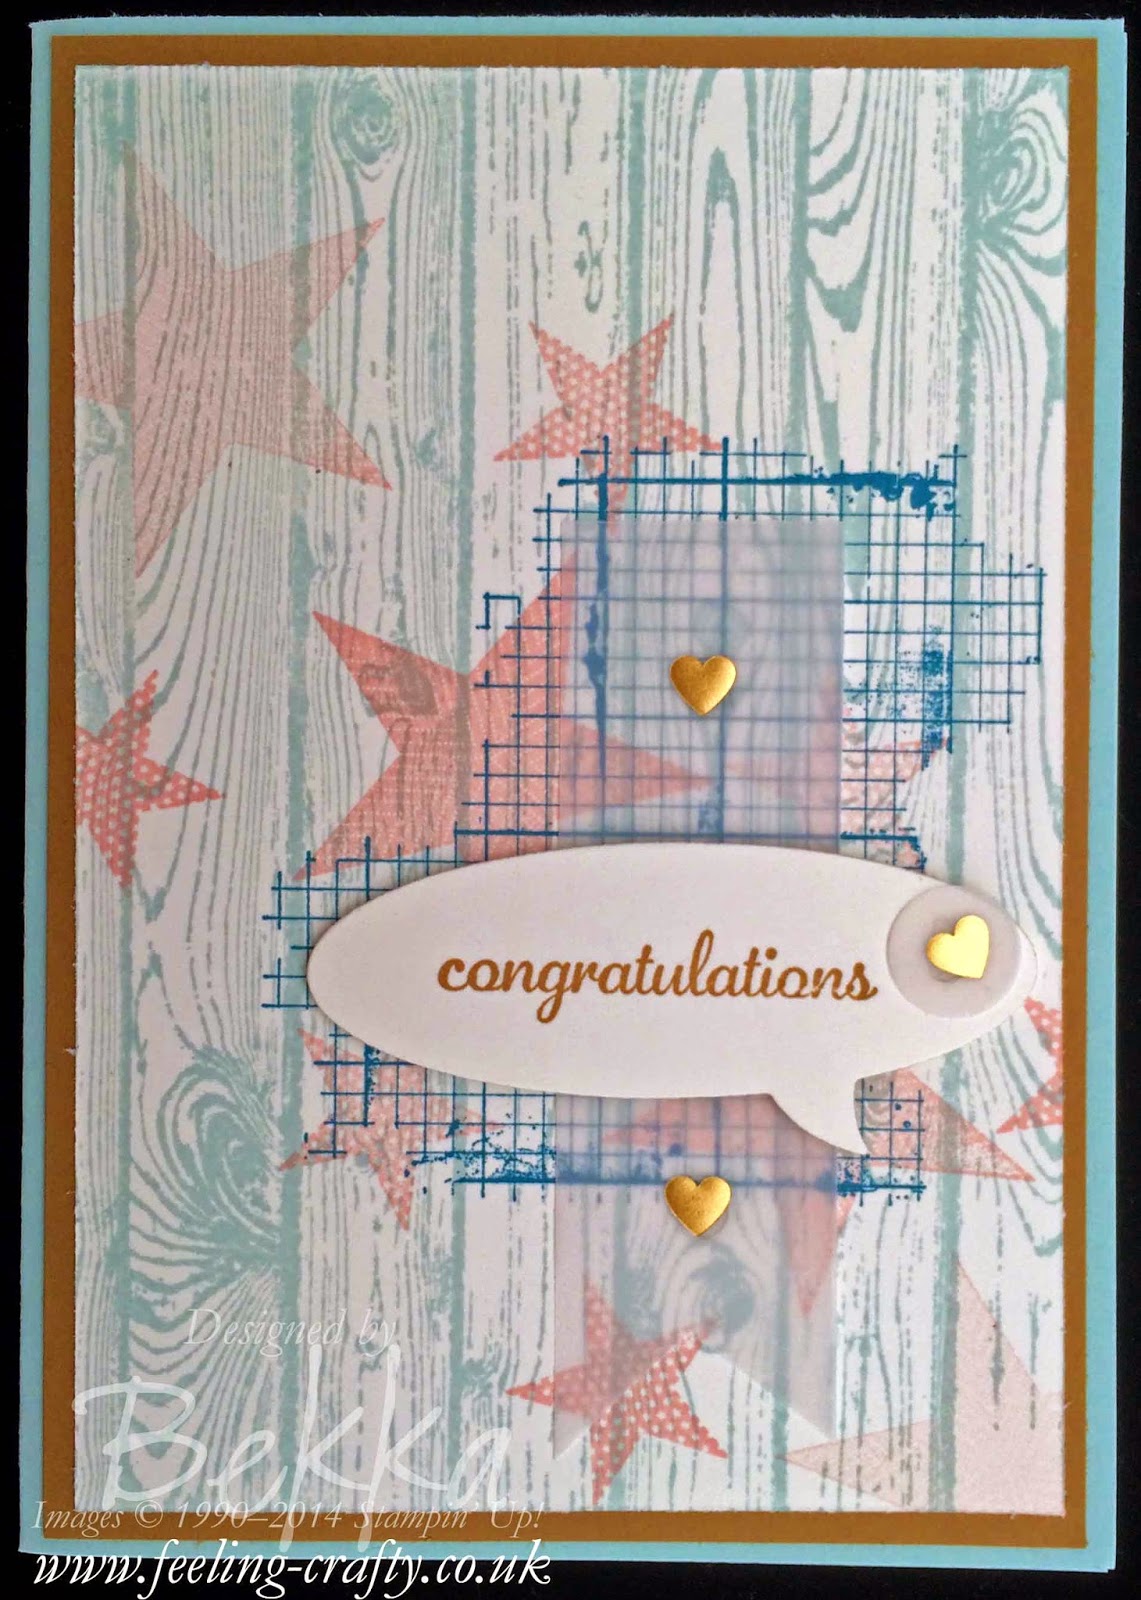 Congratulations Card made with Stampin' Up! Supplies which you can get here